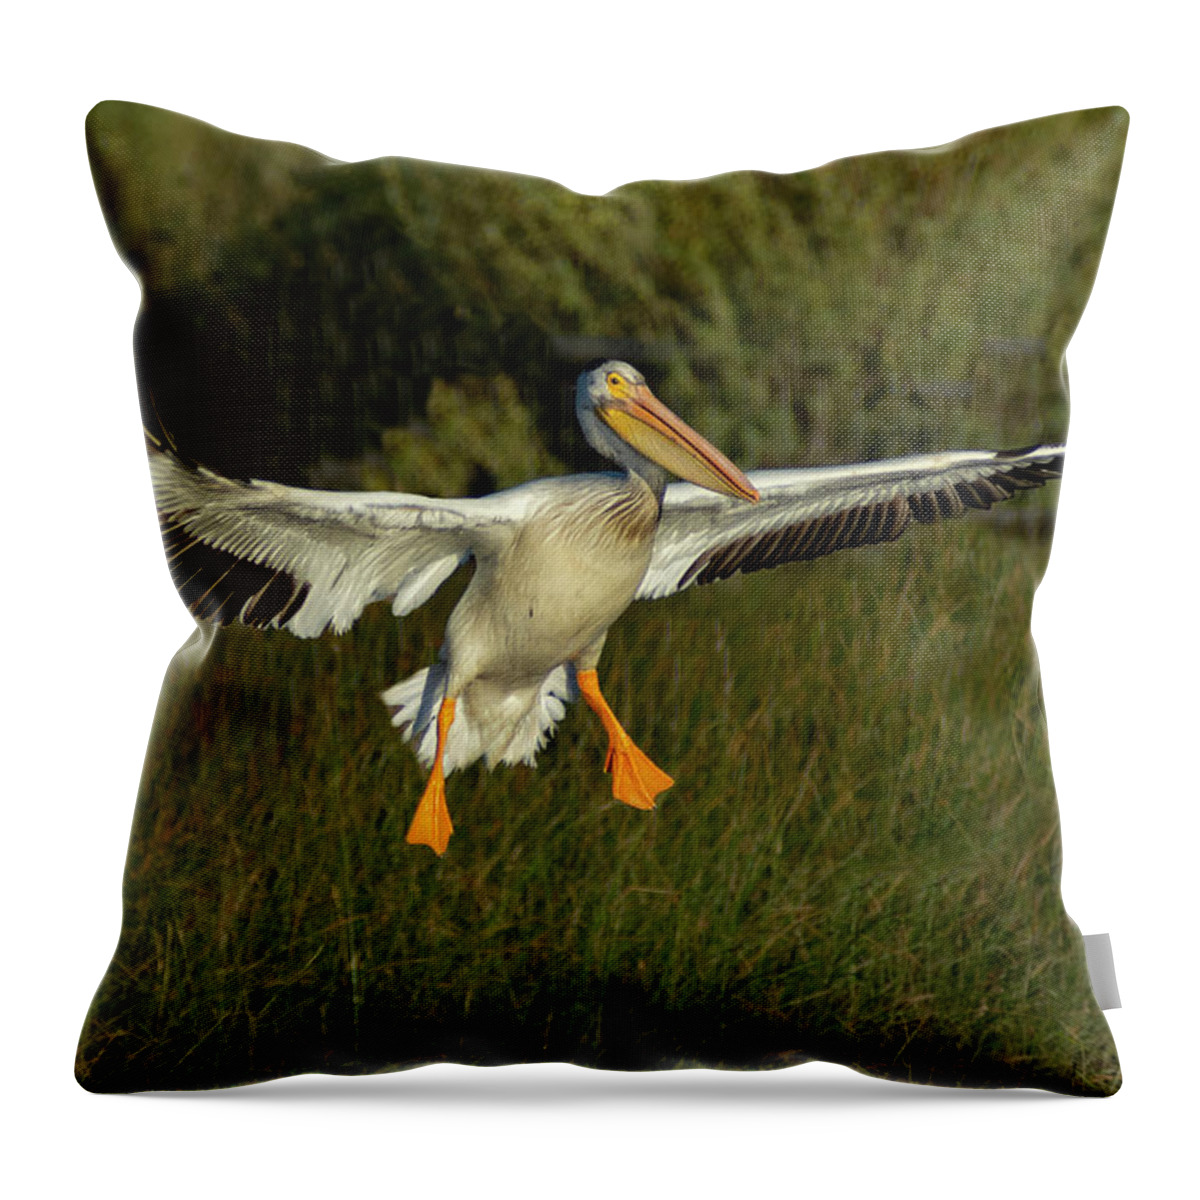 Pelican Throw Pillow featuring the photograph Pelicans 3 by Rick Mosher